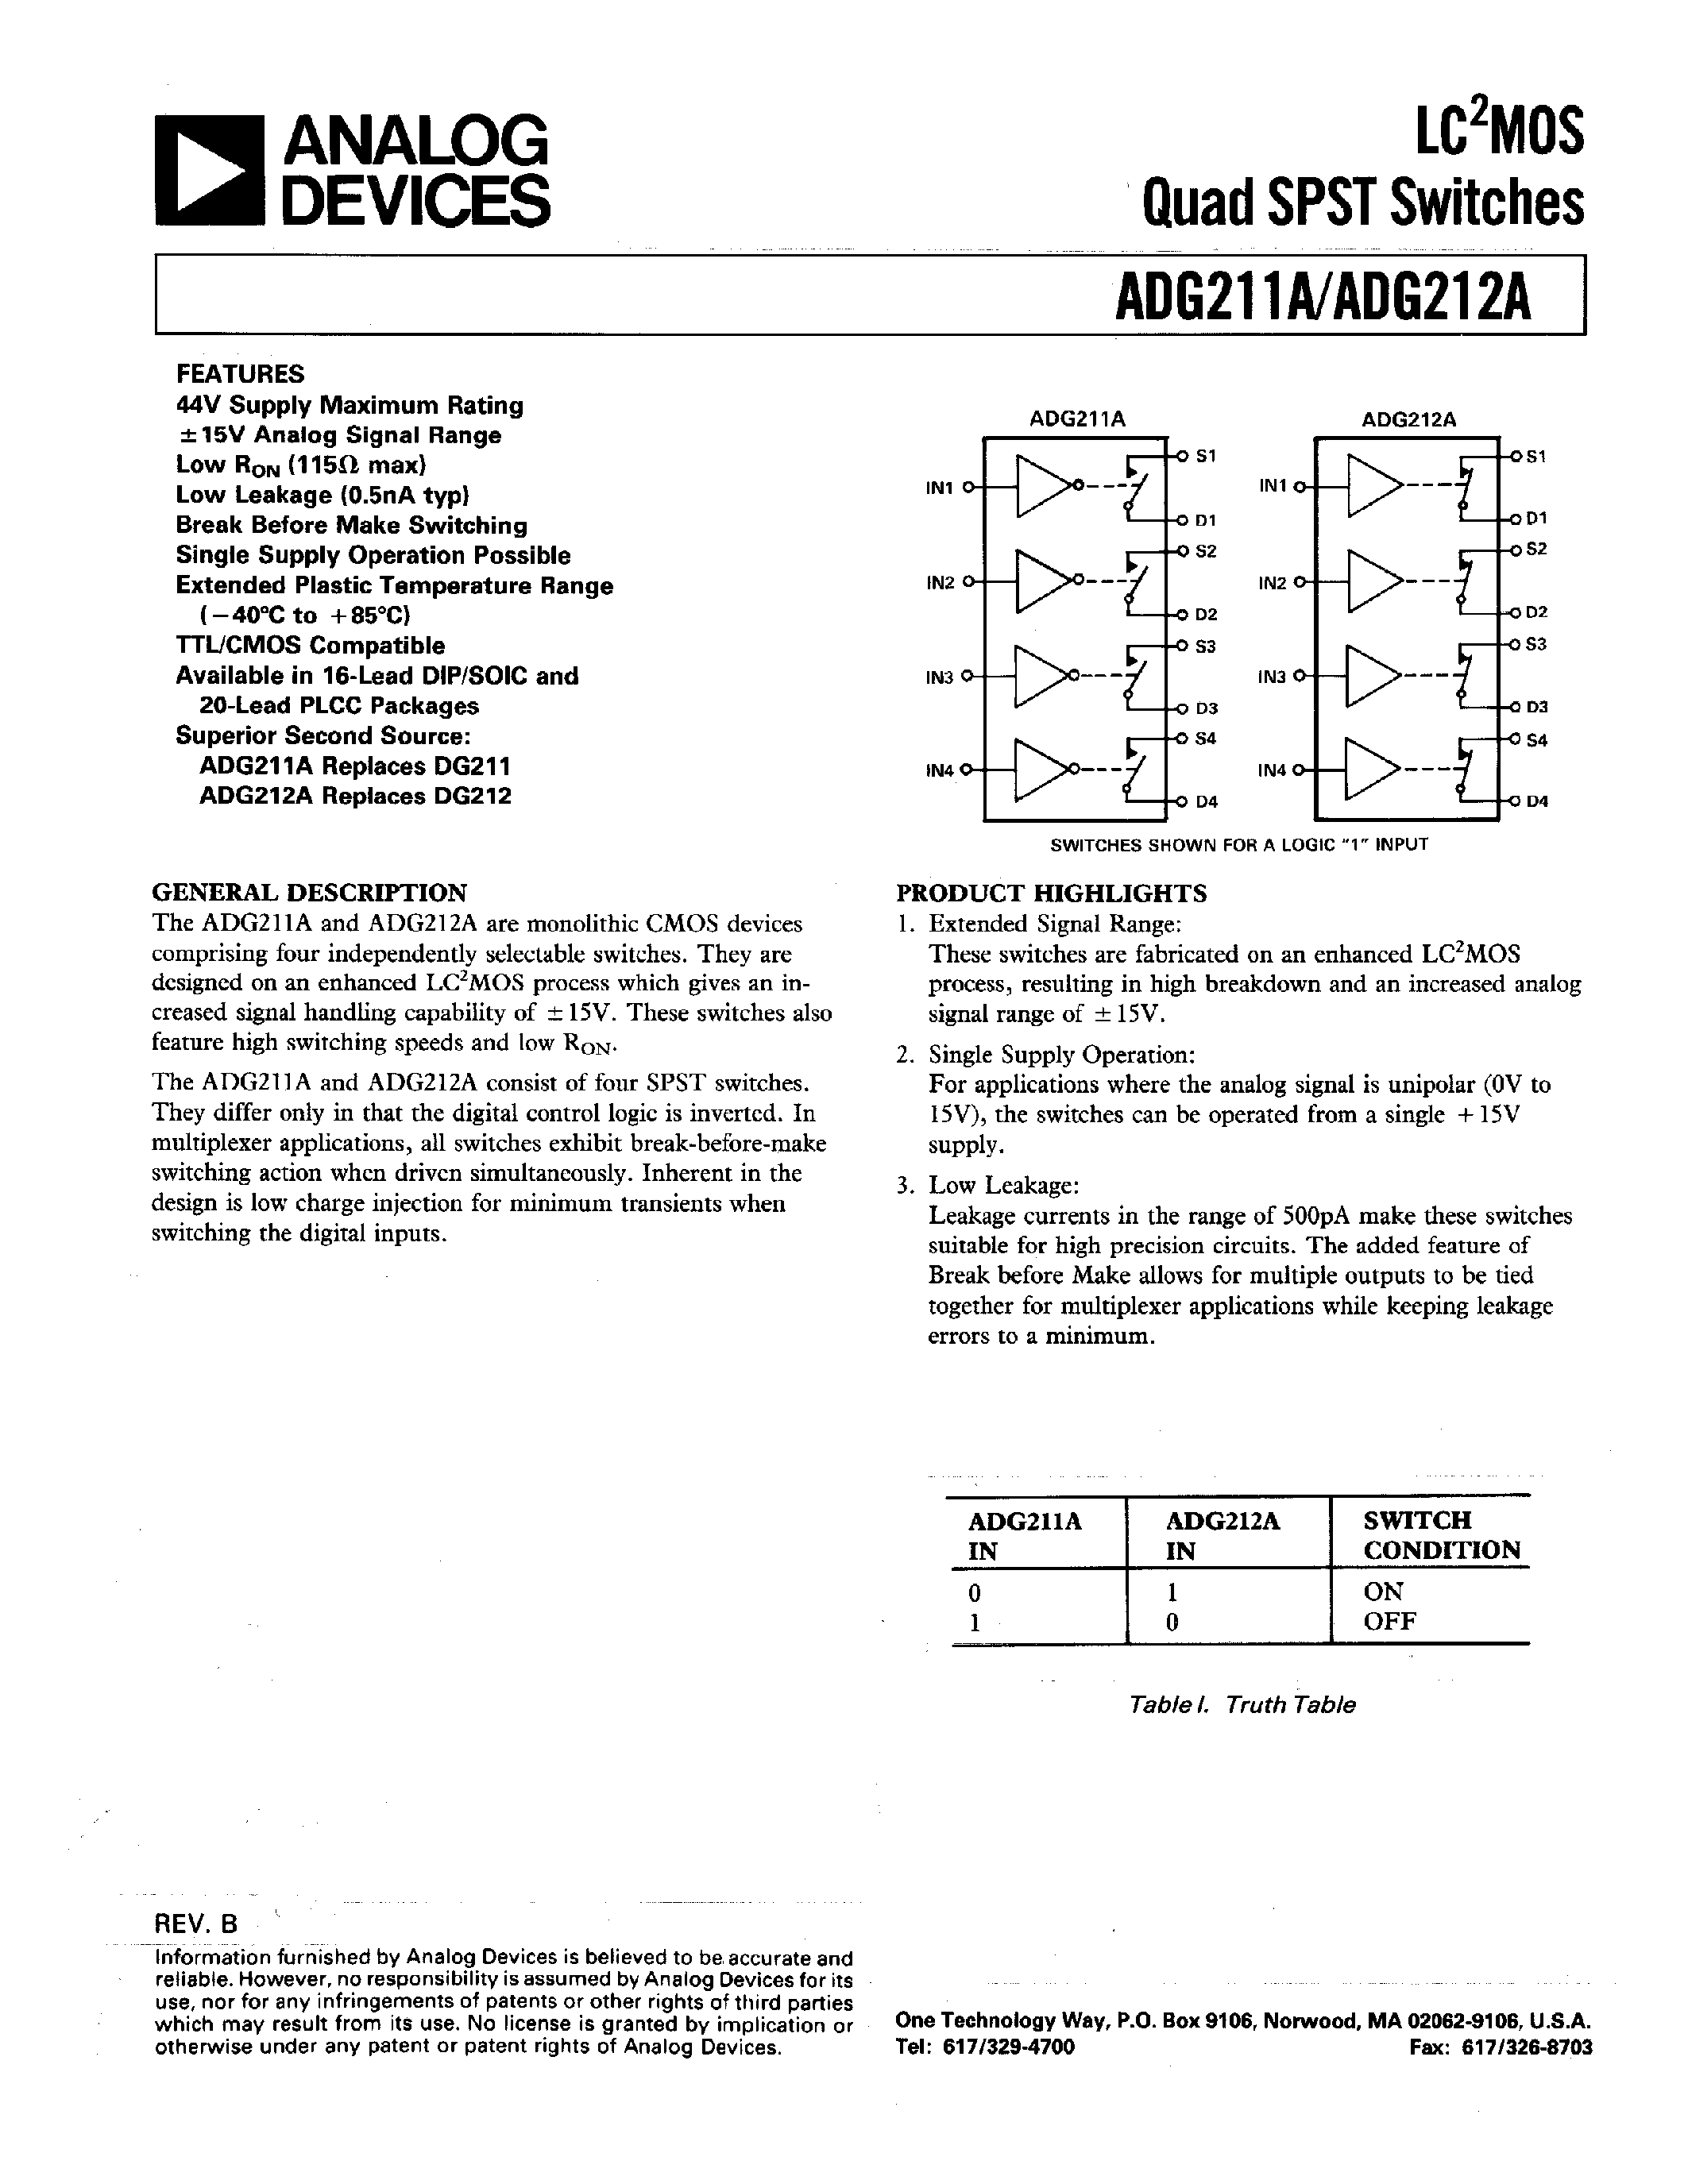 Datasheet ADG212A - LC2MOS QUAD SPST SWITCHES page 1